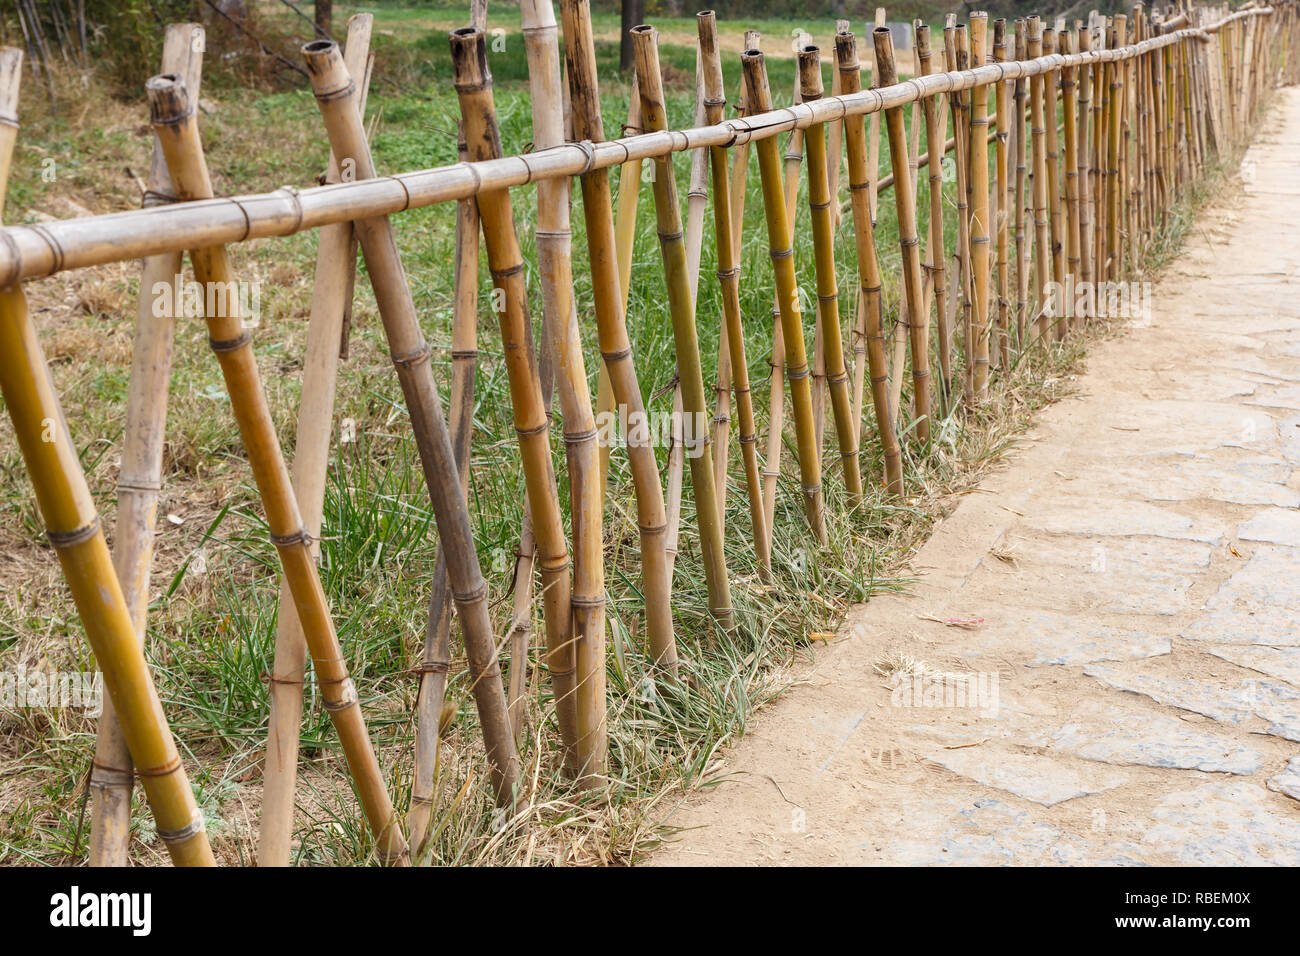 Bamboo fence along a footpath in a park Stock Photo